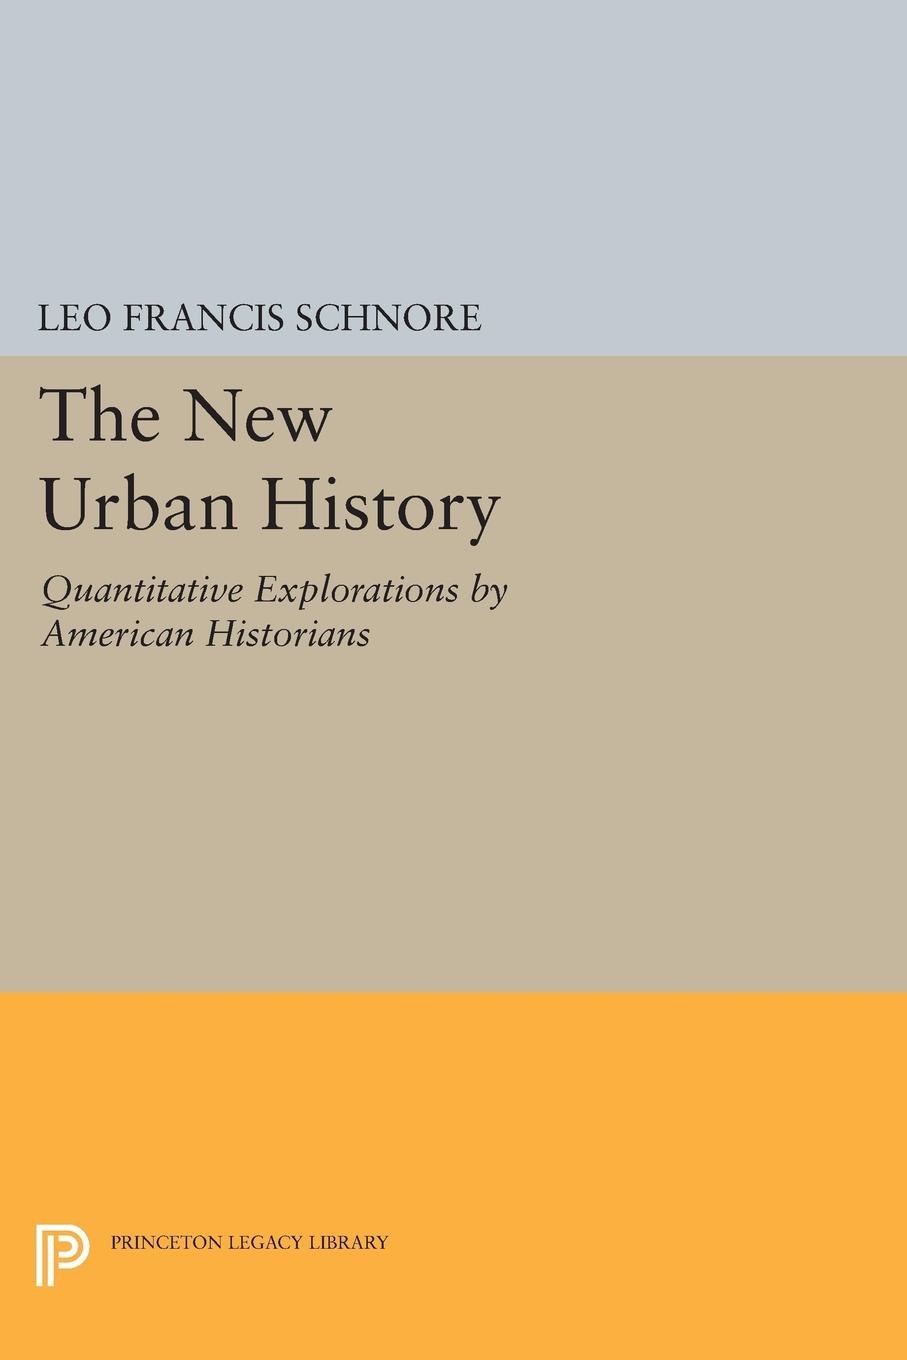 what is urban history essay